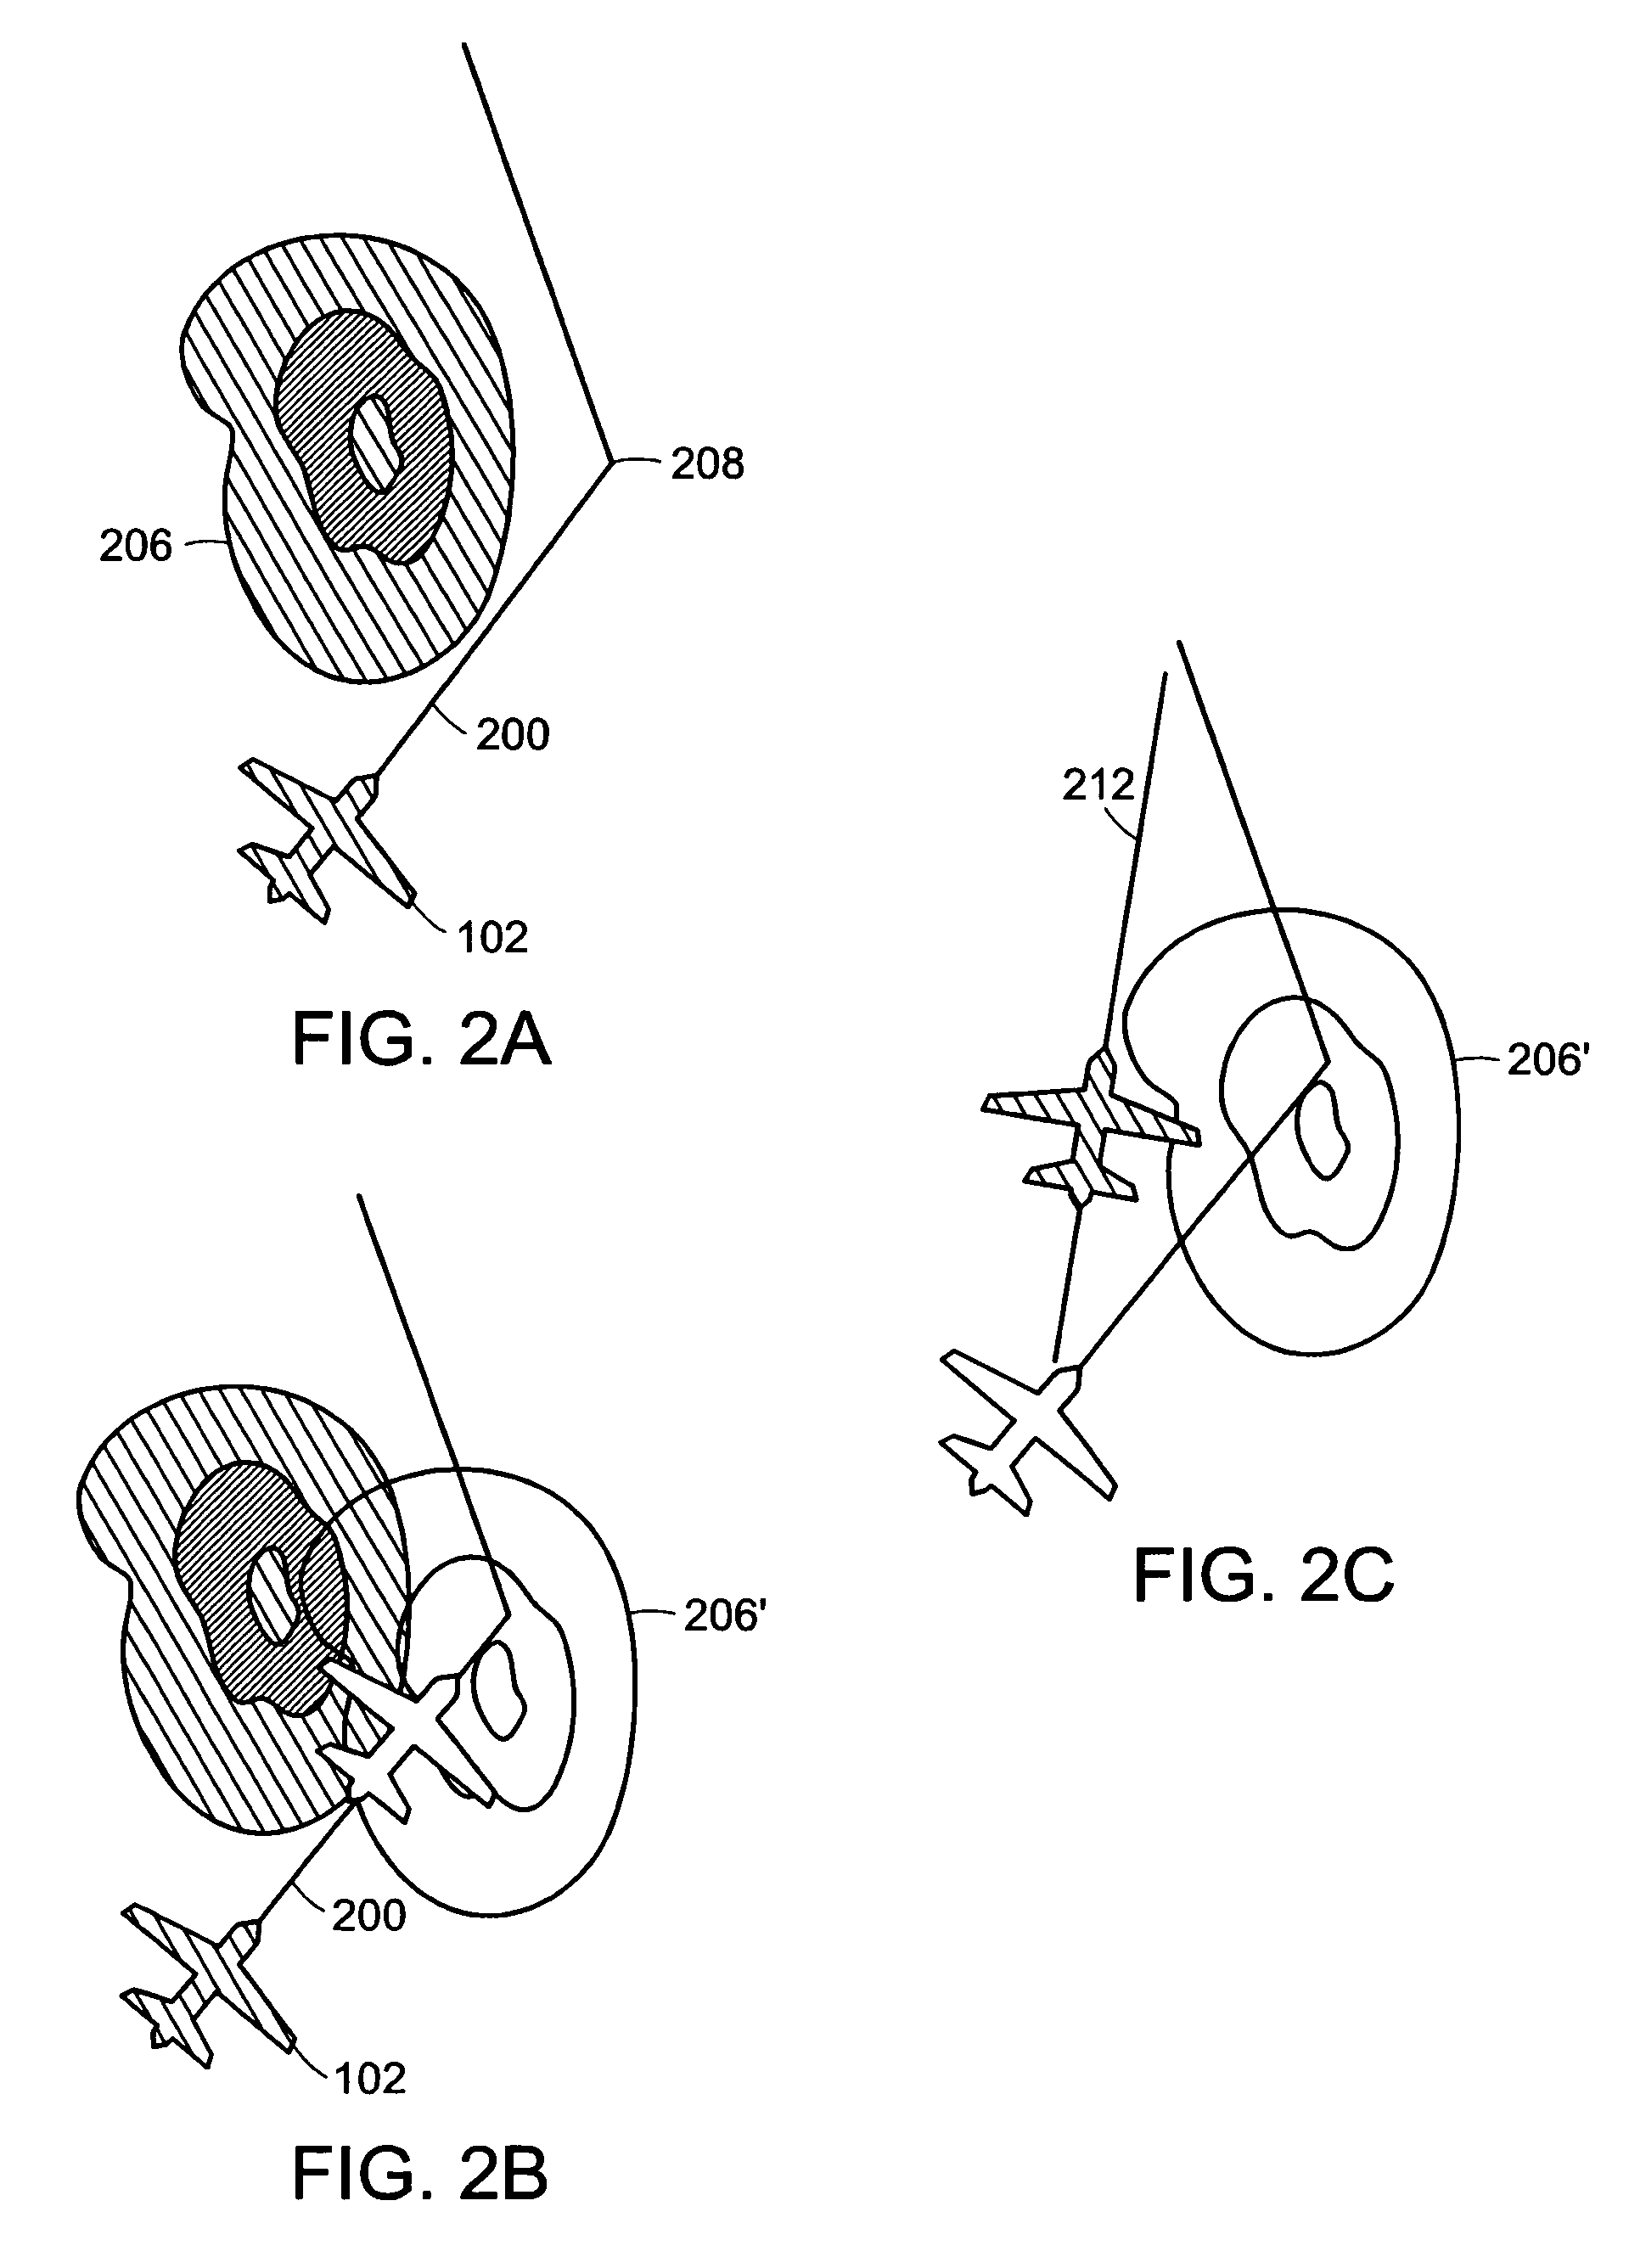 Method for digital transmission and display of weather imagery